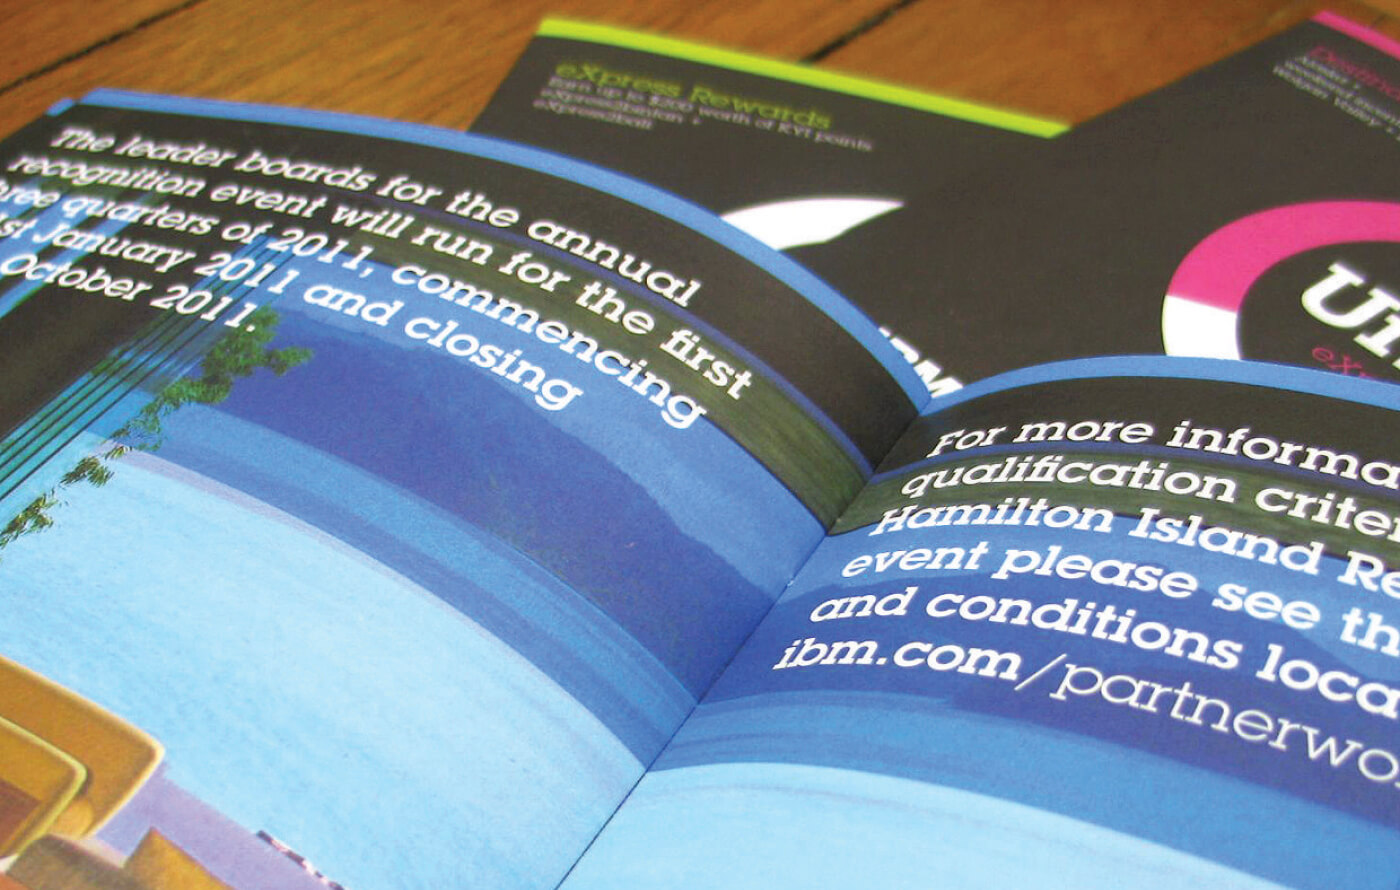 Front covers and an inside spread of the branded IBM Unltd printed collateral